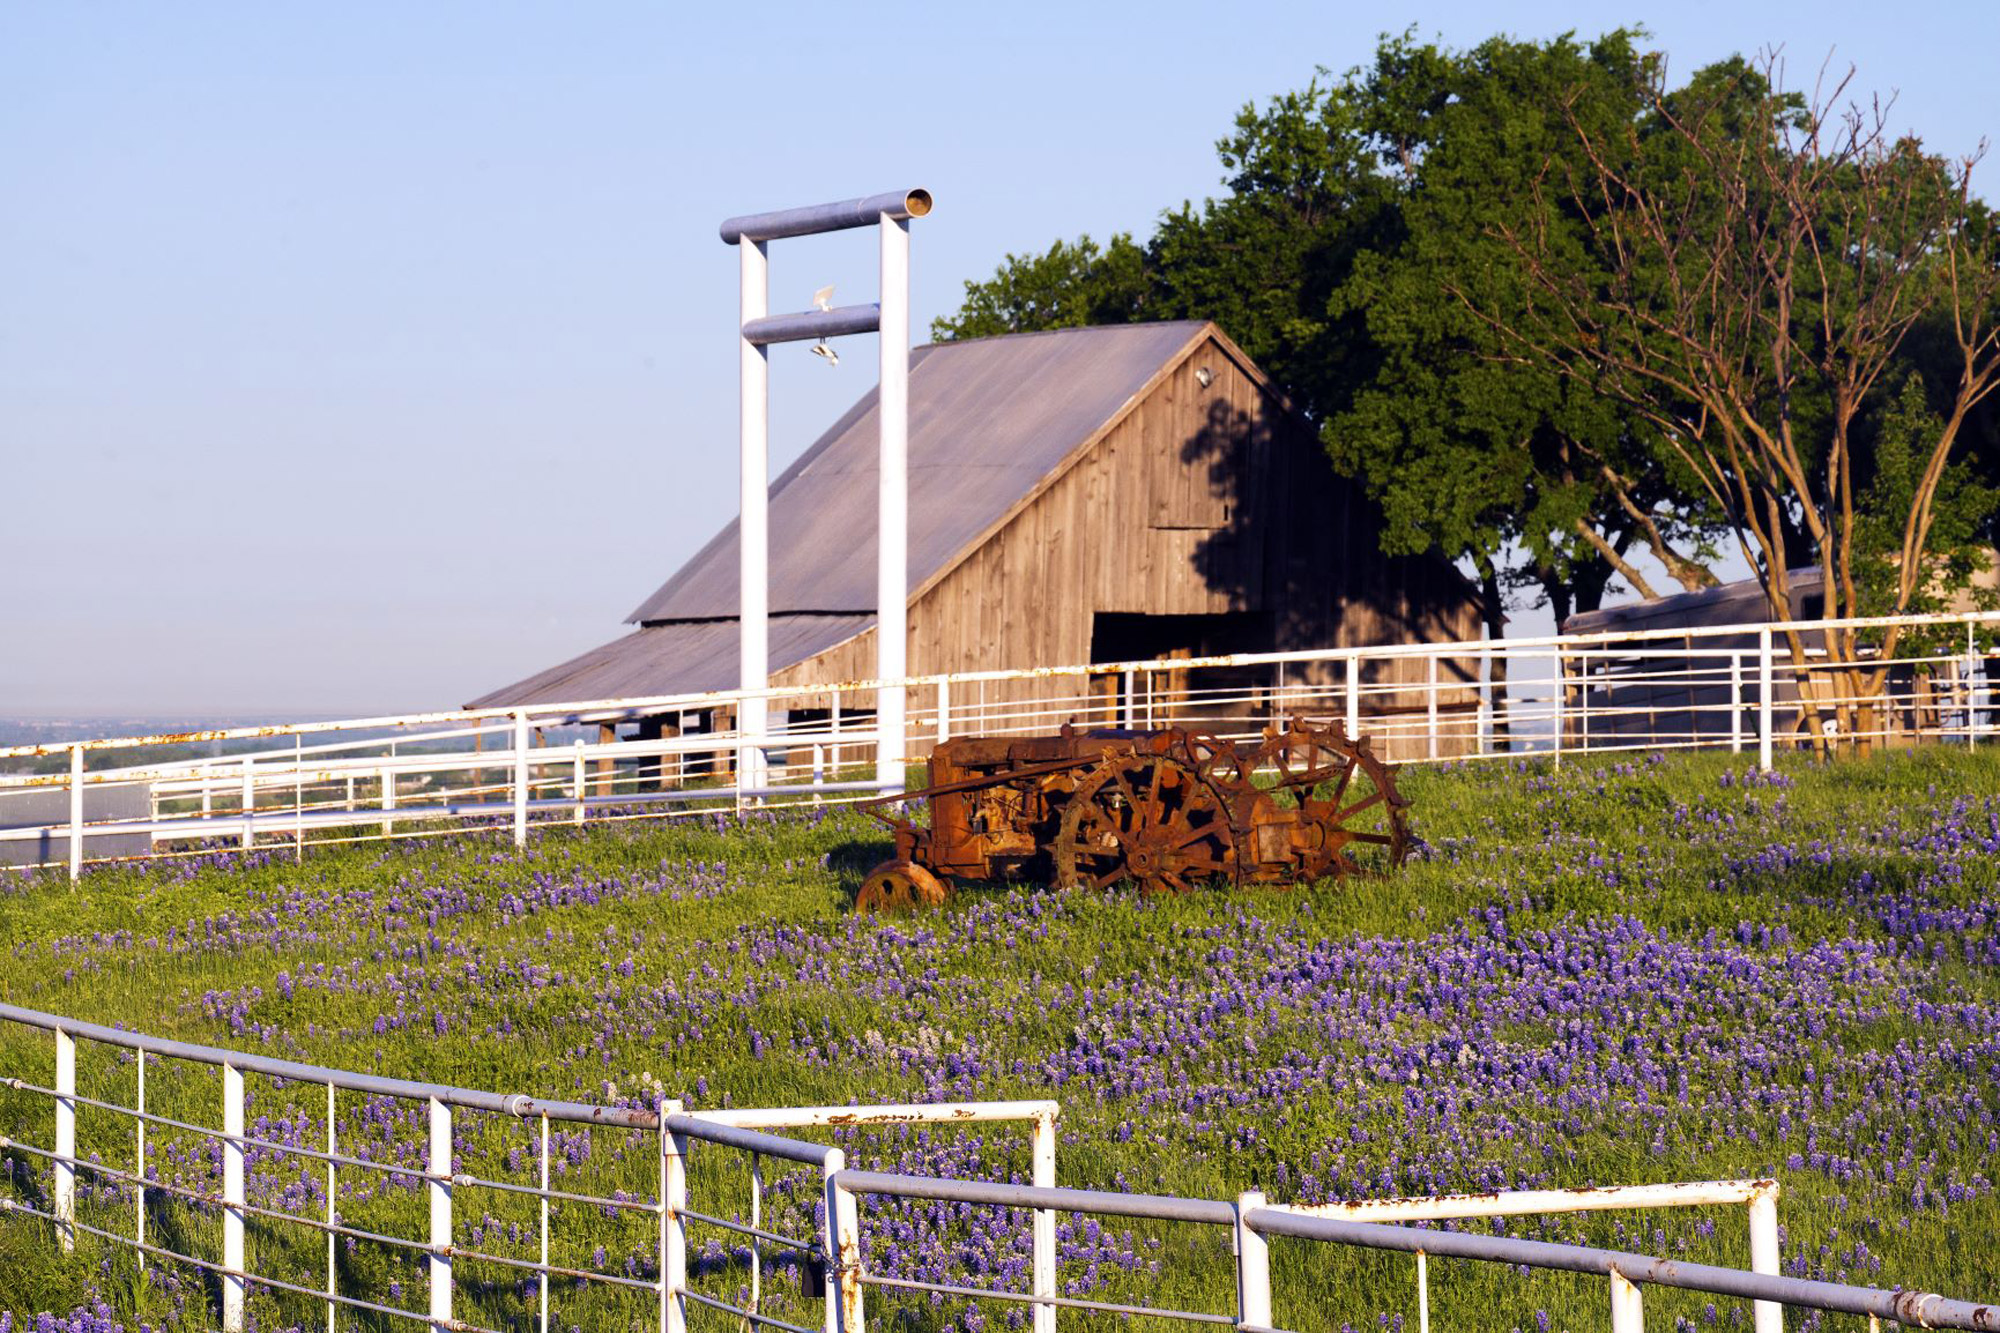 Houston TX countryside - Real Property Management Houston offering experienced management for your investment property